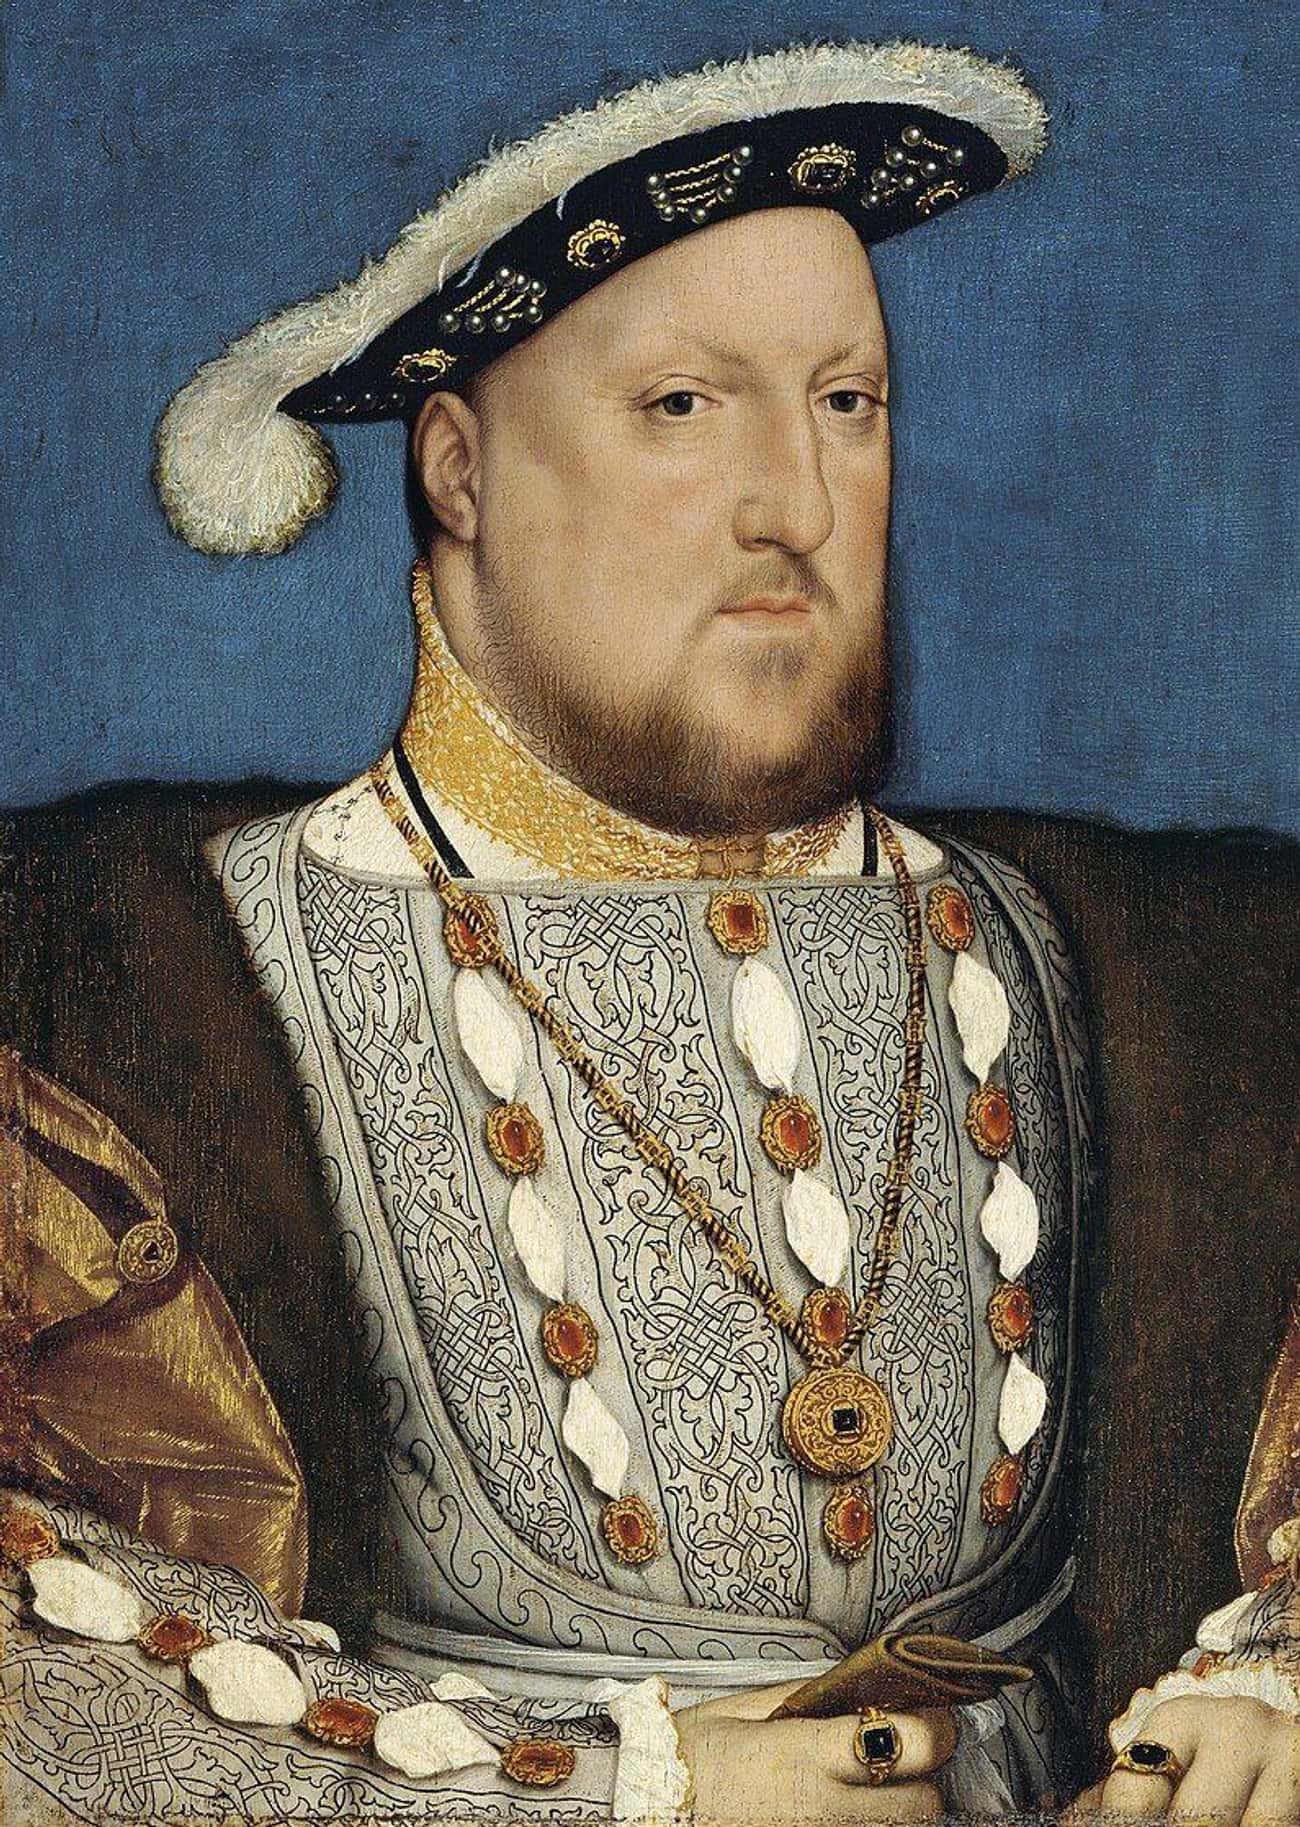 Henry VIII Had A Thing For Executing People, But He Usually Spared The Insane